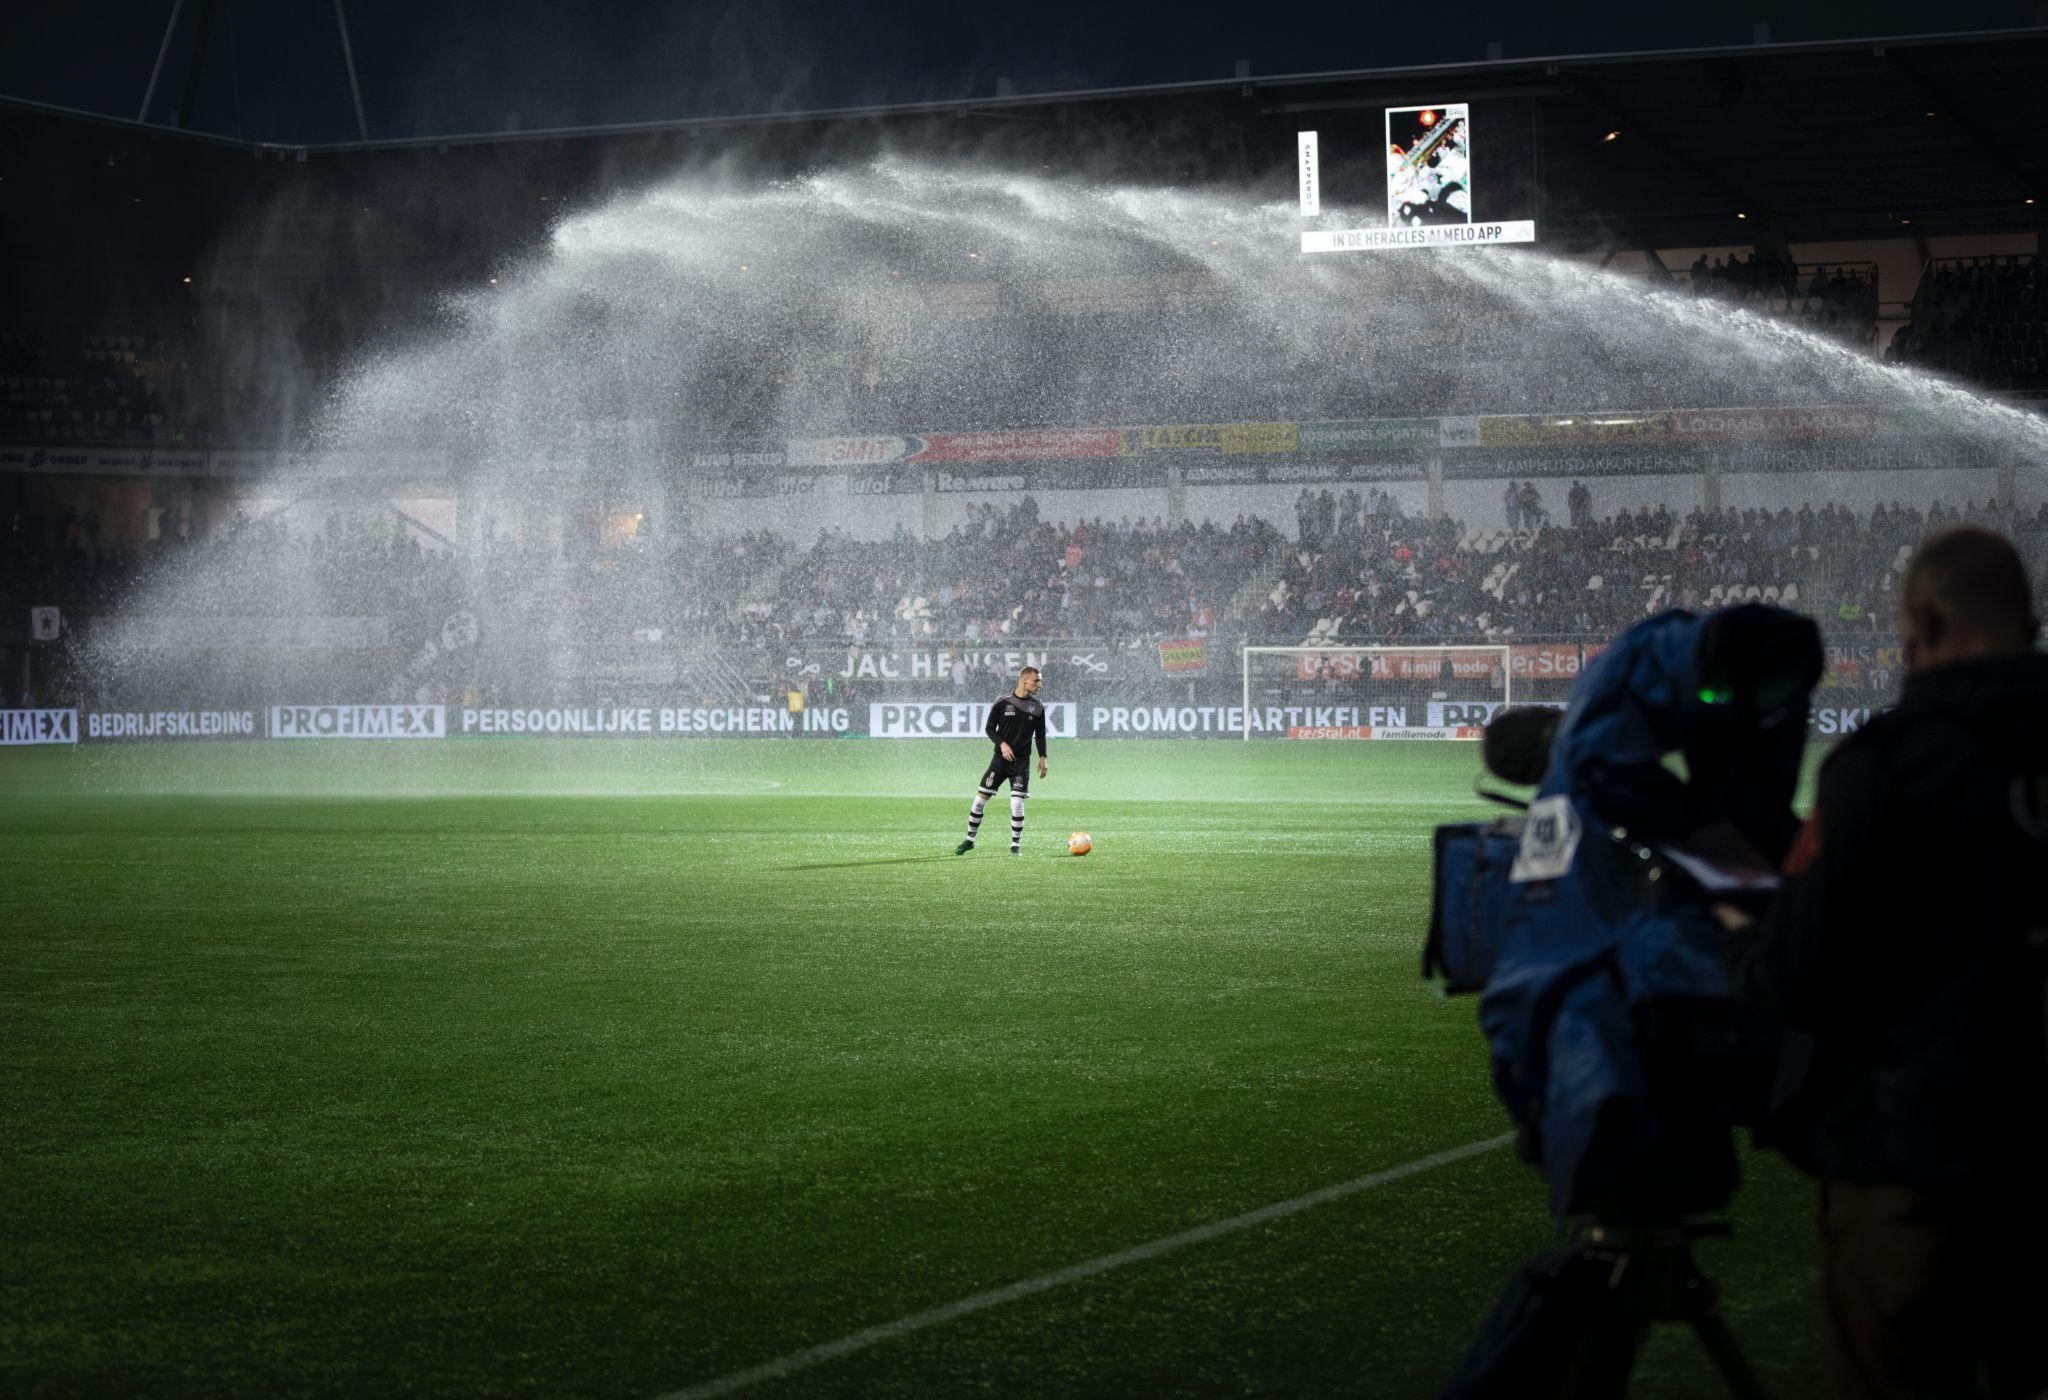 A soccer player standing on a football field enduring the rain during a match